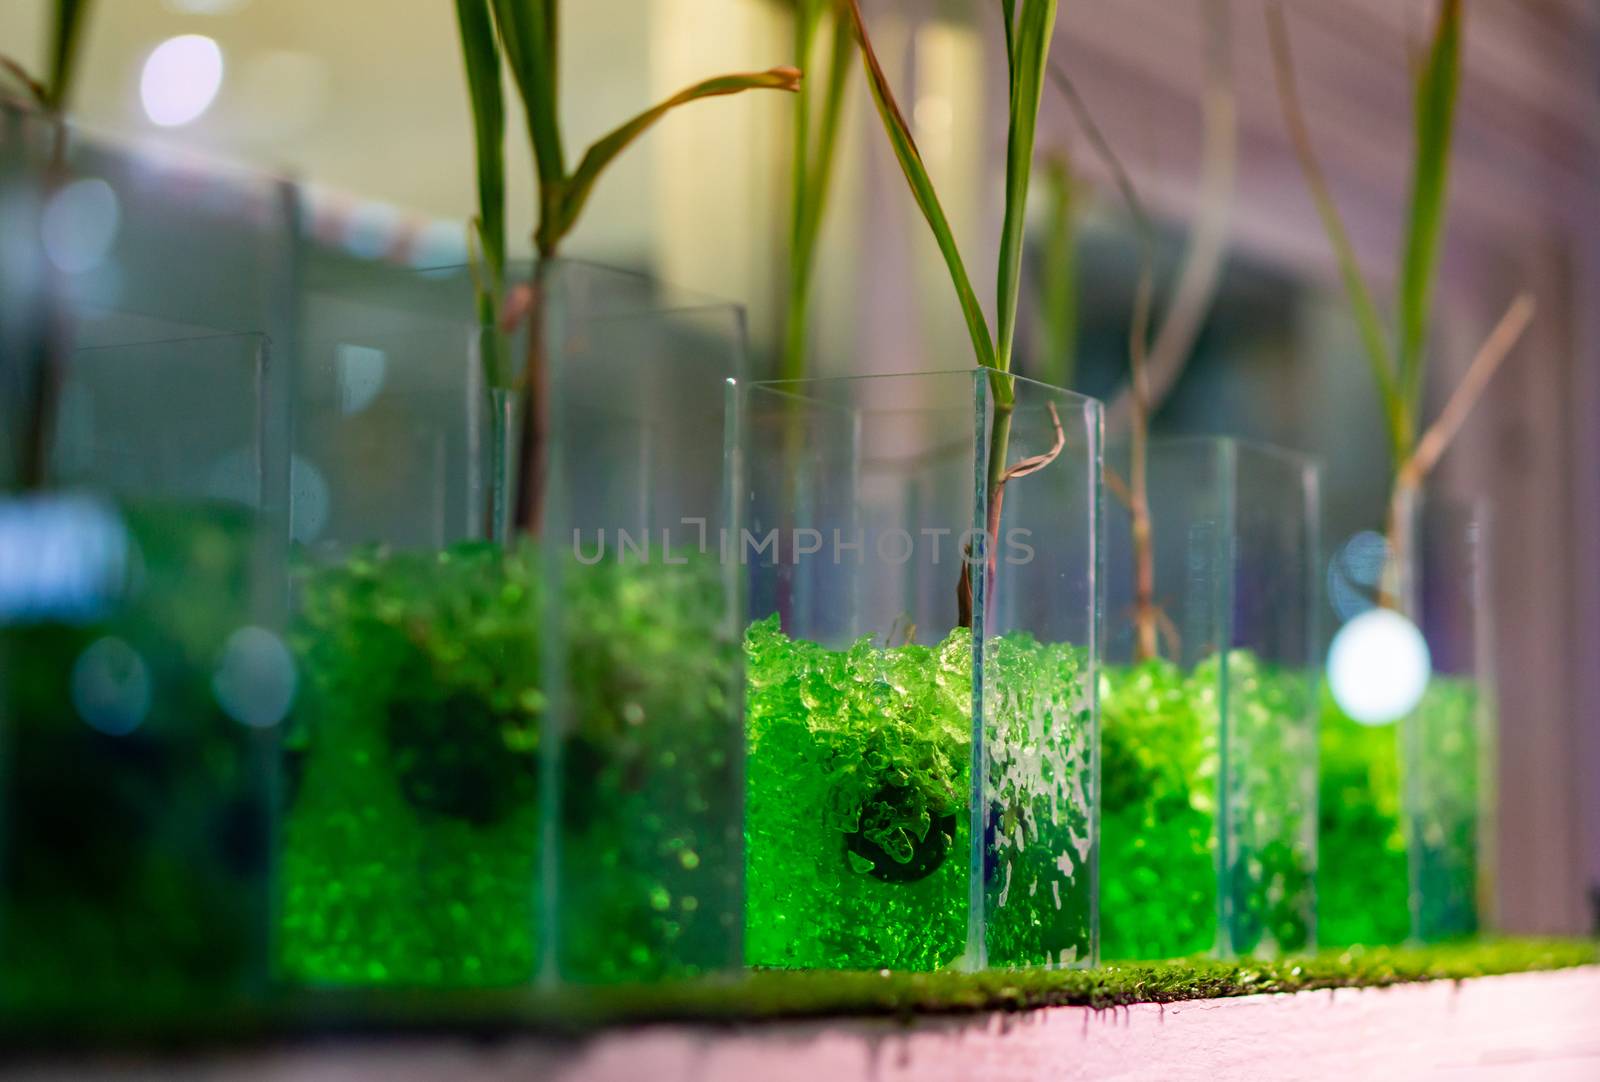 The experiment of planting rice in lab. by pkproject